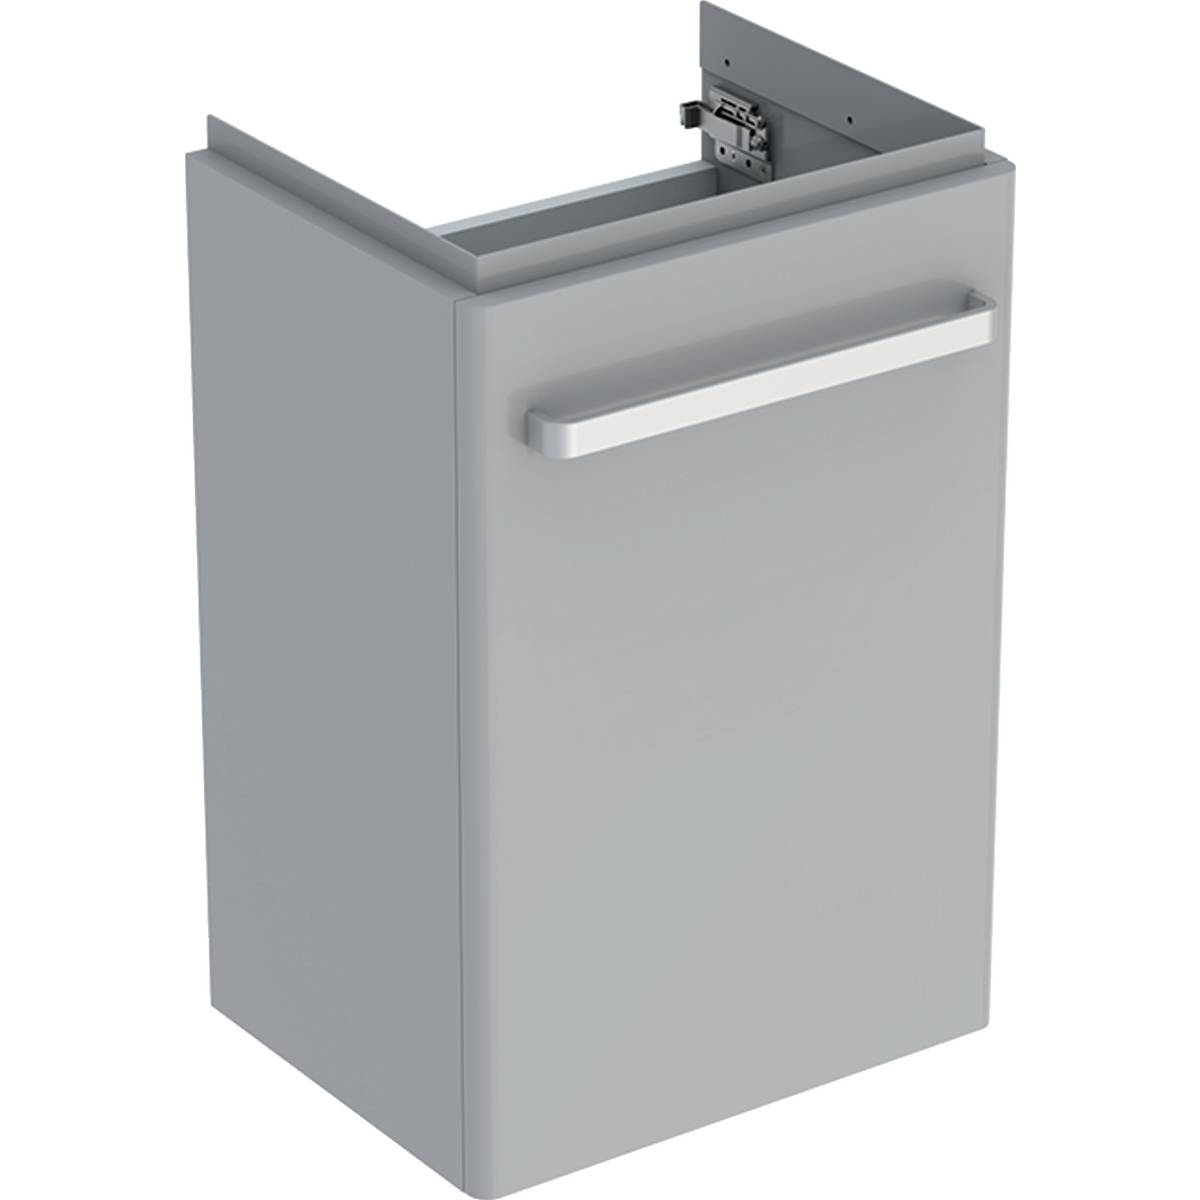 Selnova Compact cabinet for handrinse basin, with one door and service space